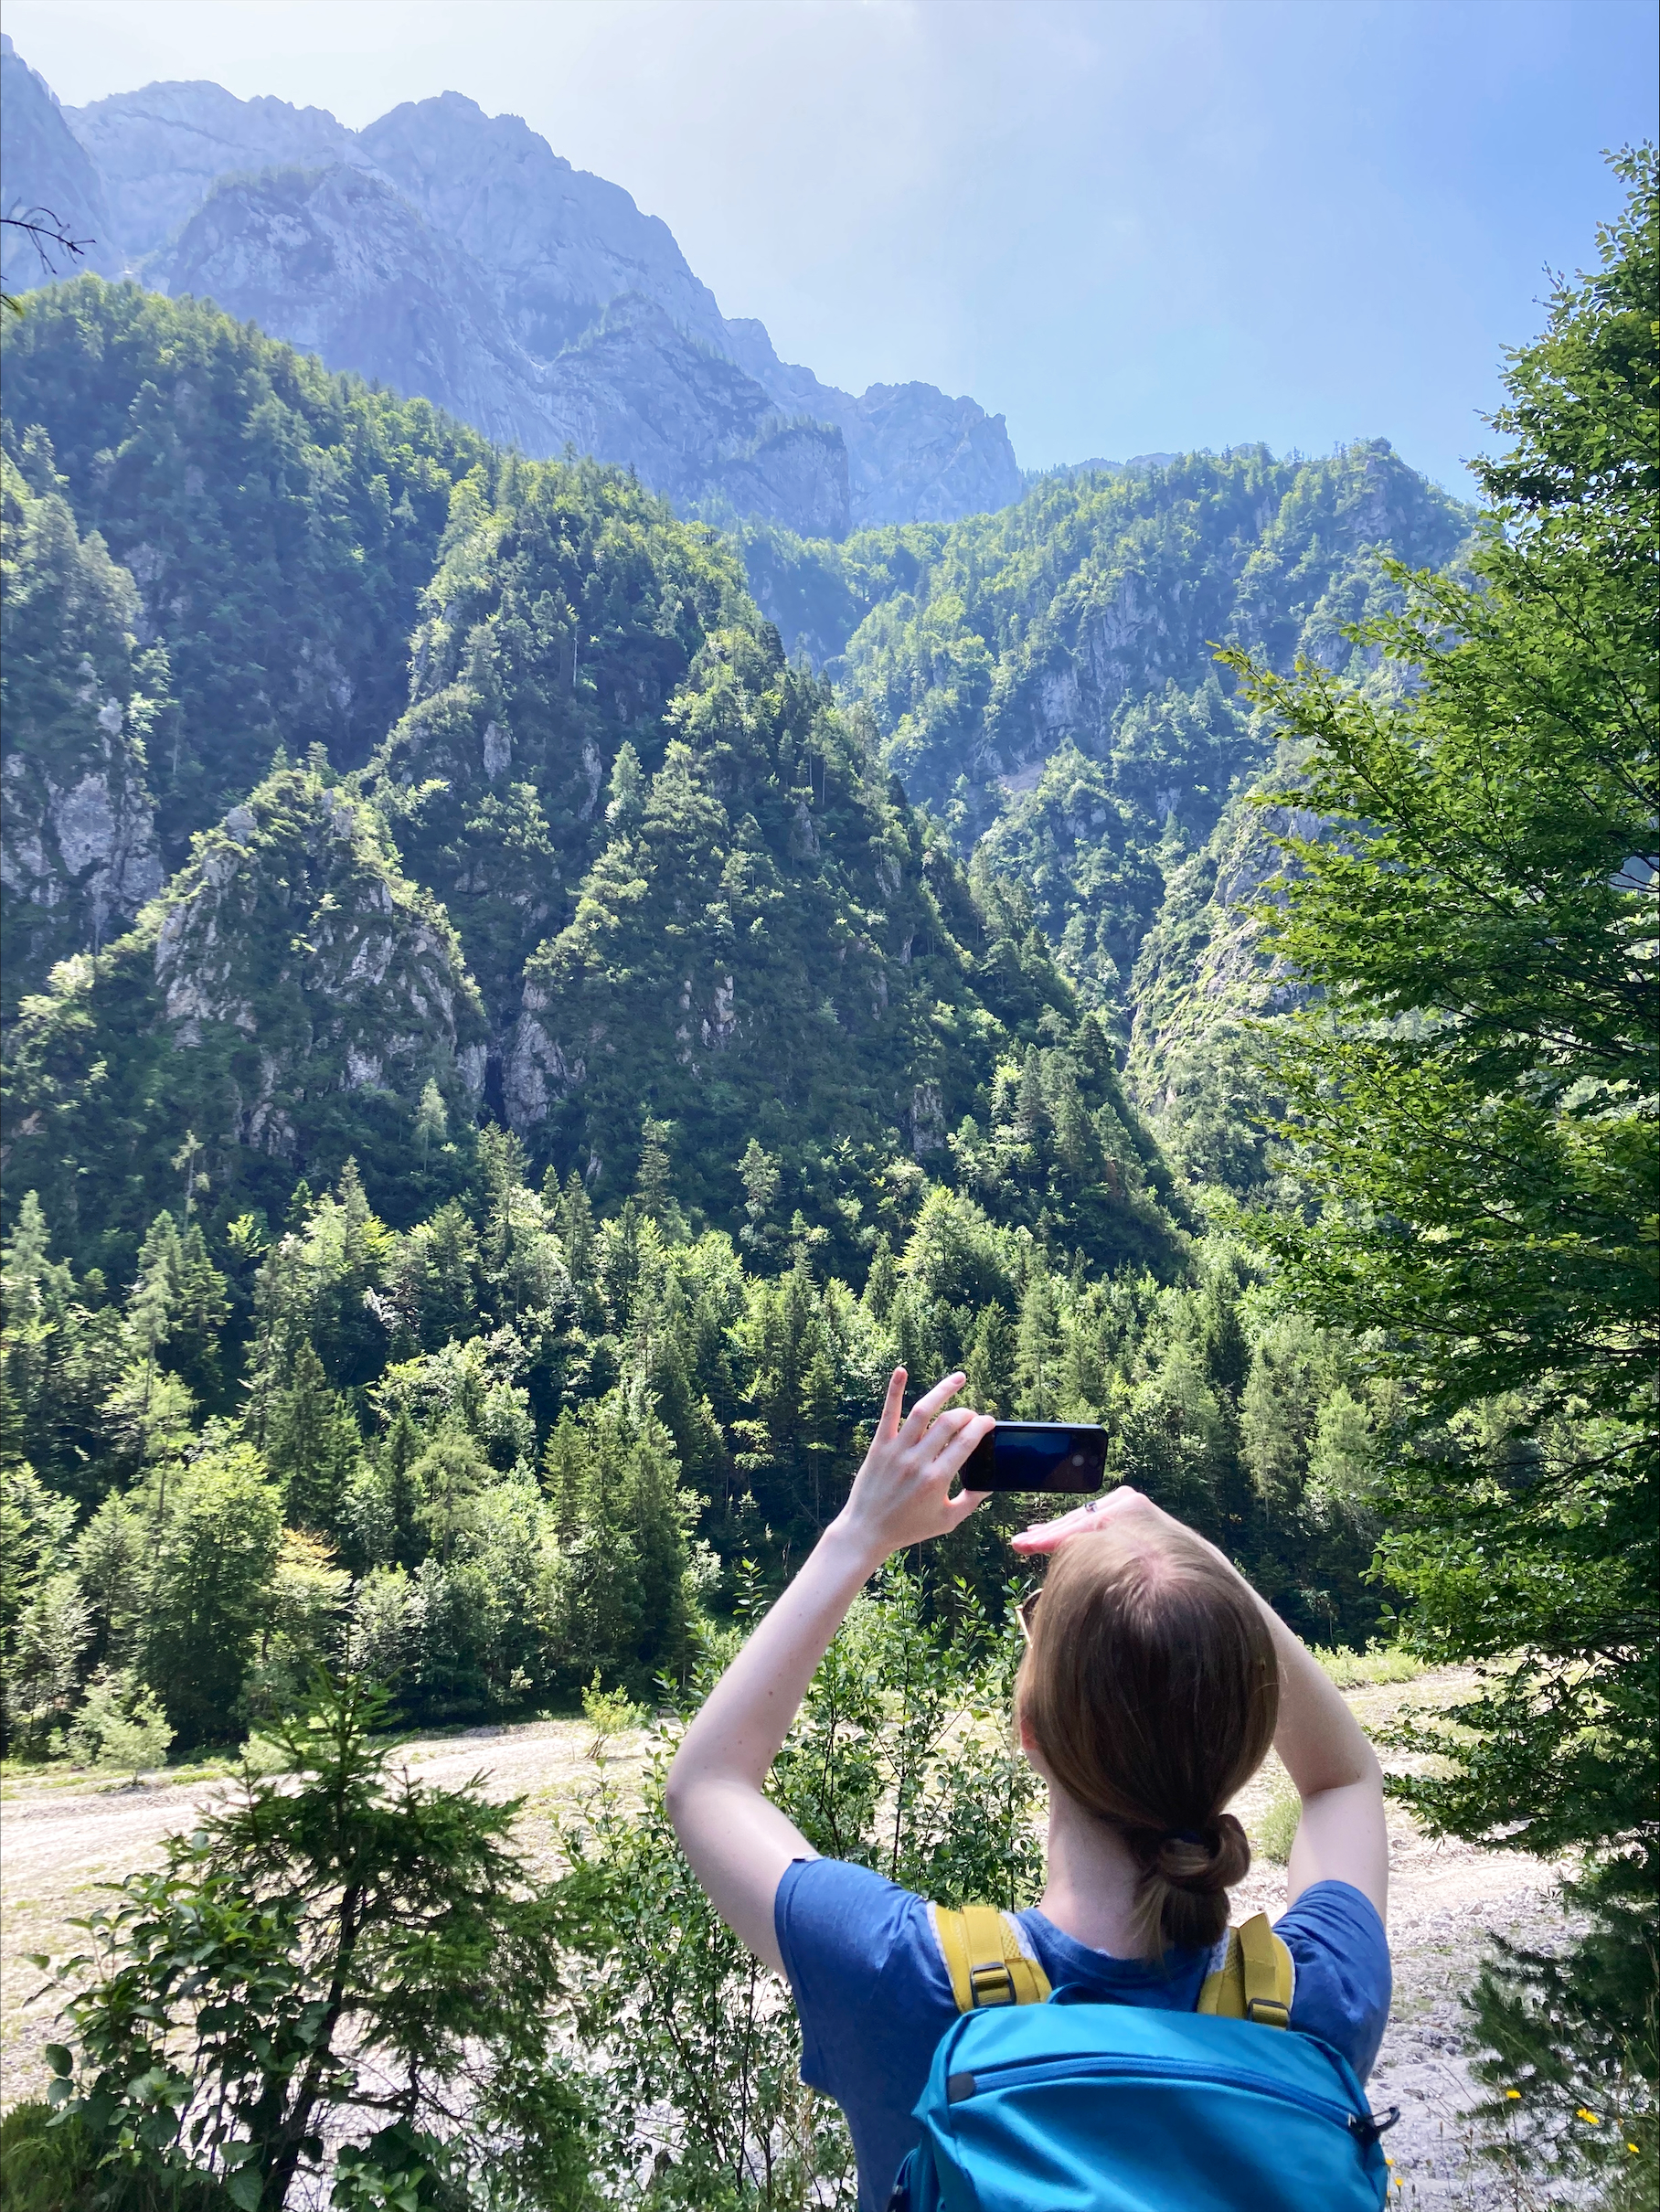 A landscape with mountains and trees. A person stands in the foreground taking a photograph of it on their phone